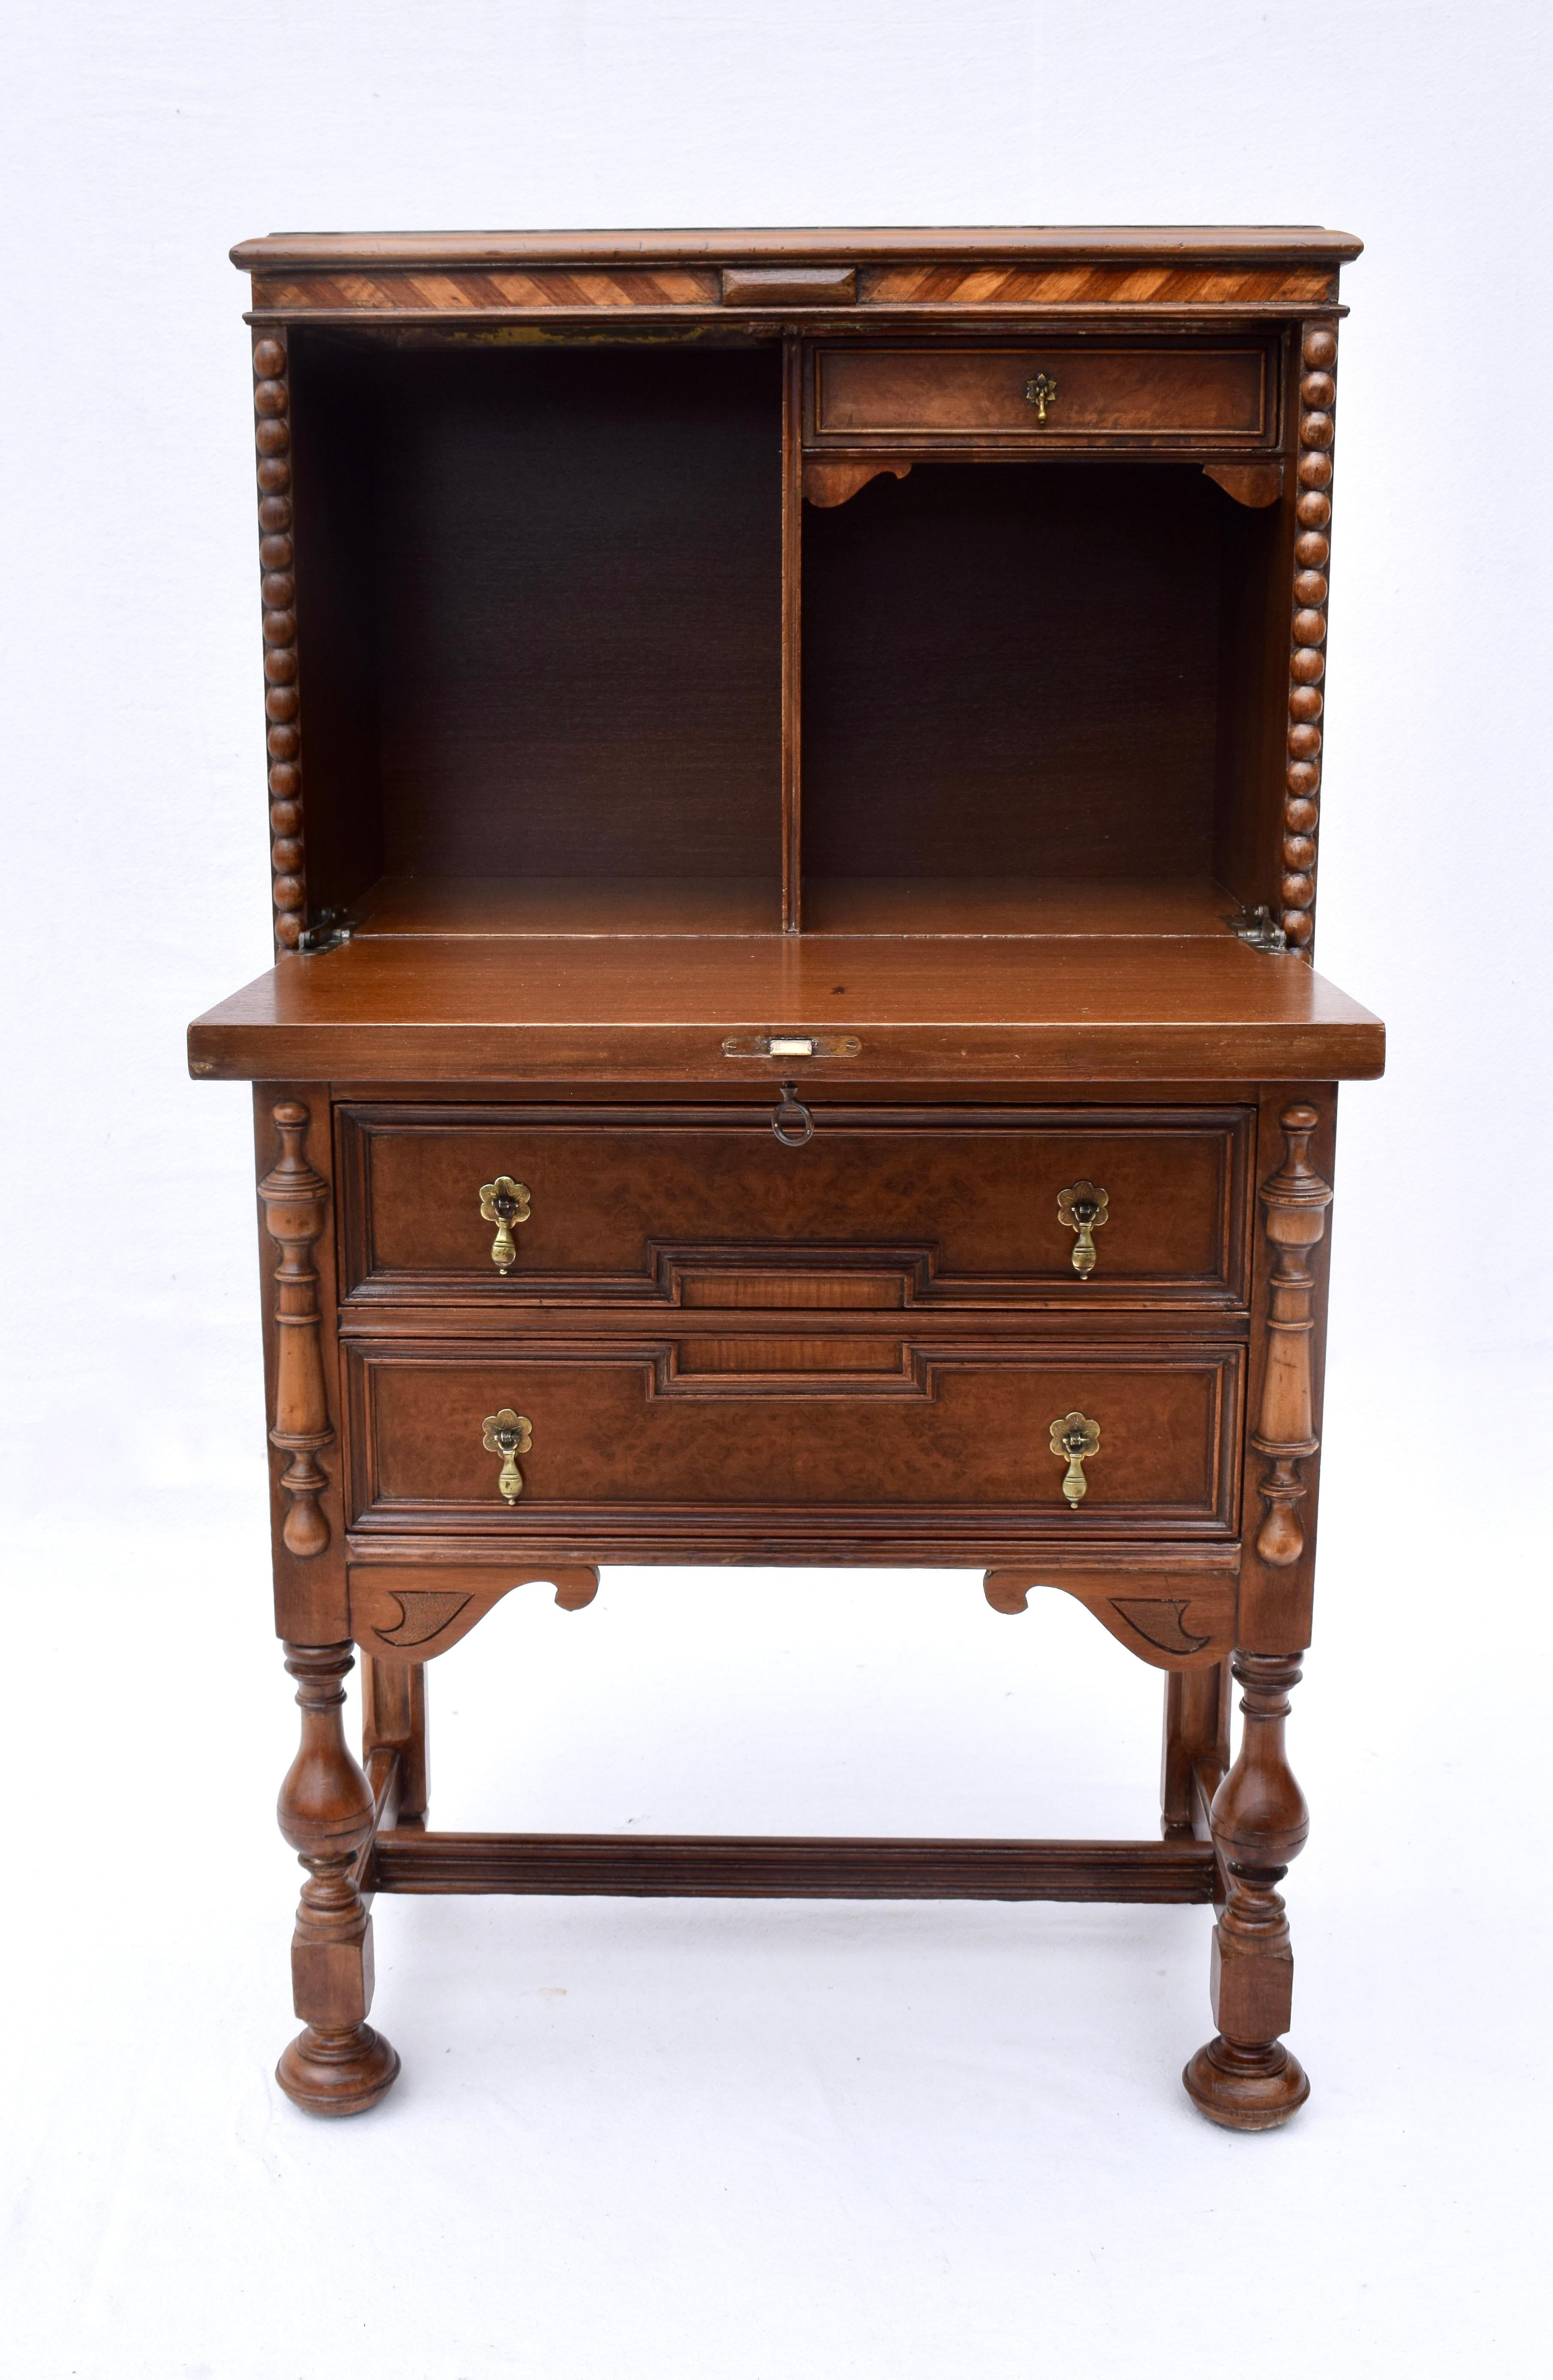 An early 20th C. Jacobean style bar cabinet with drop down front & three drawers.
Lovingly restored, our refinishers removed 4 layers of paint to surprisingly expose burl & other woods in addition to intricate inlay designs. A multifunctional,